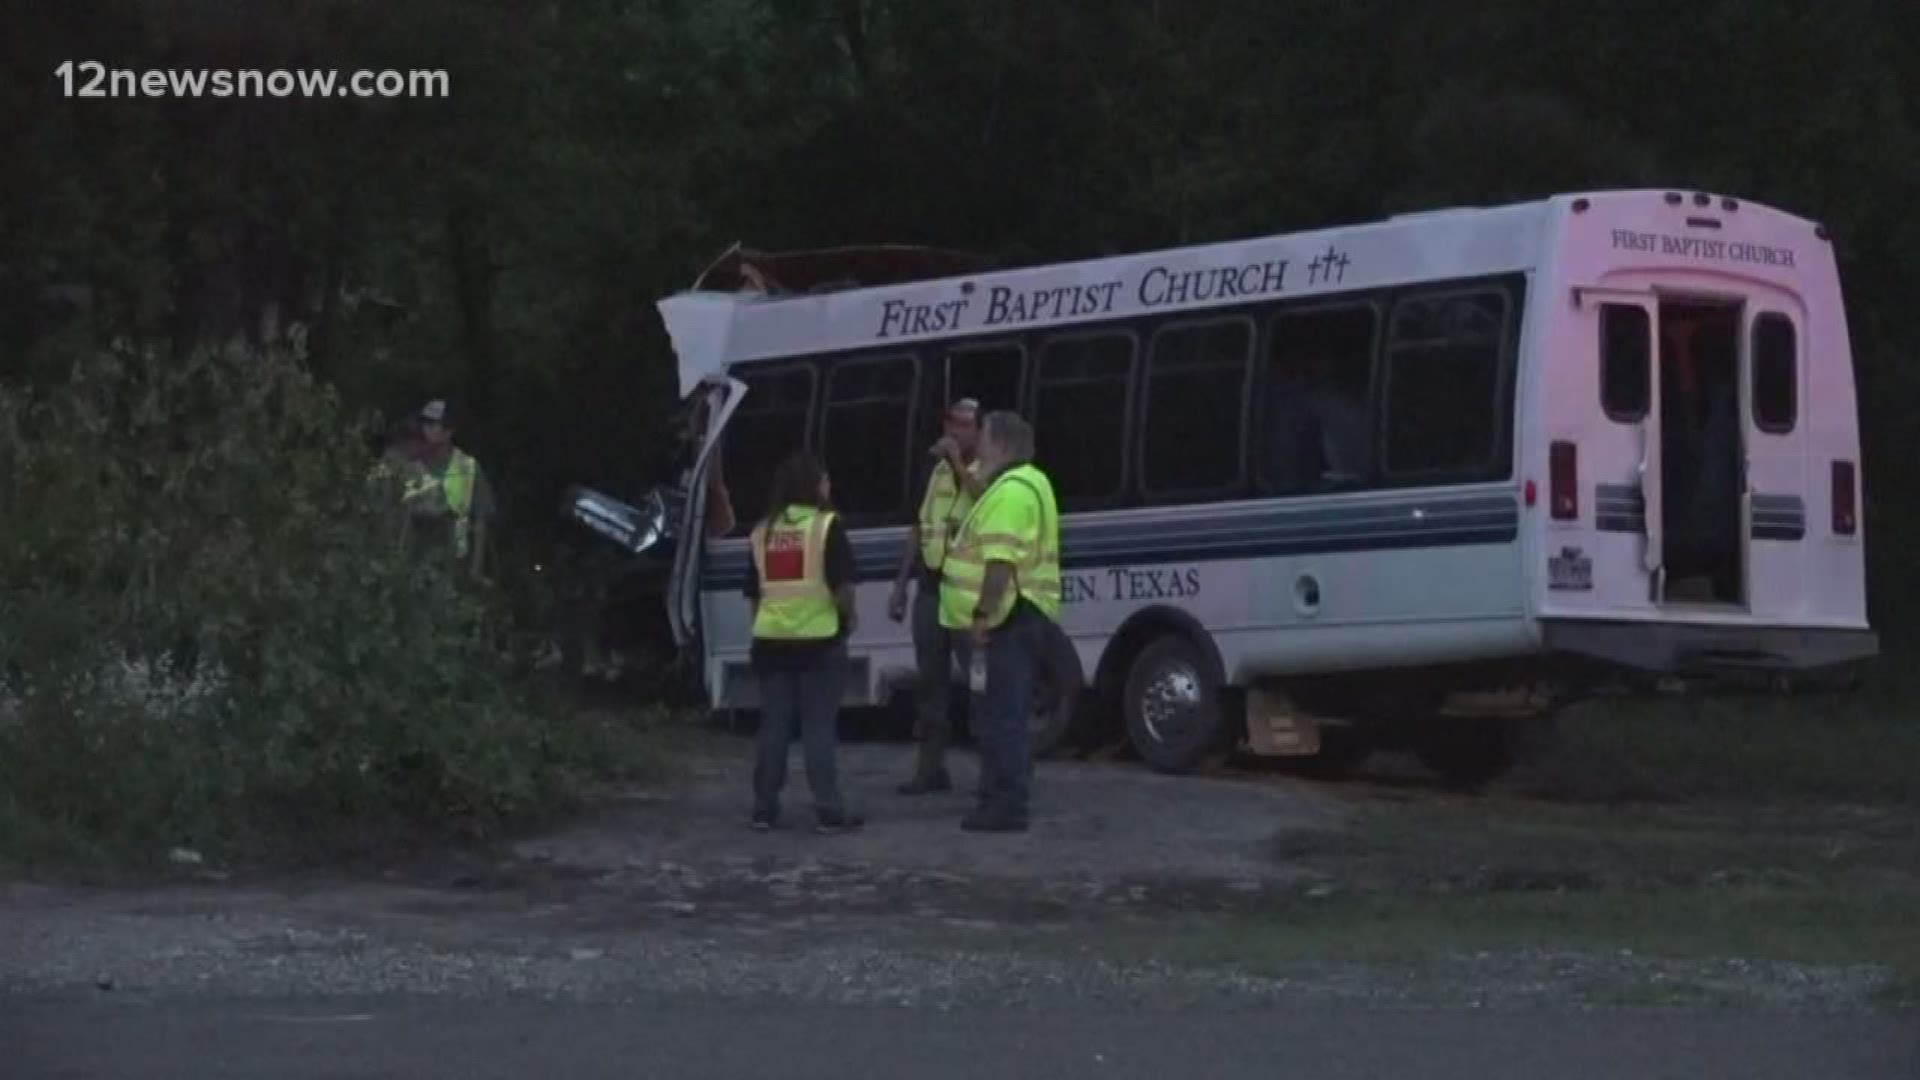 The crash left one man dead and injured several people, including six children.